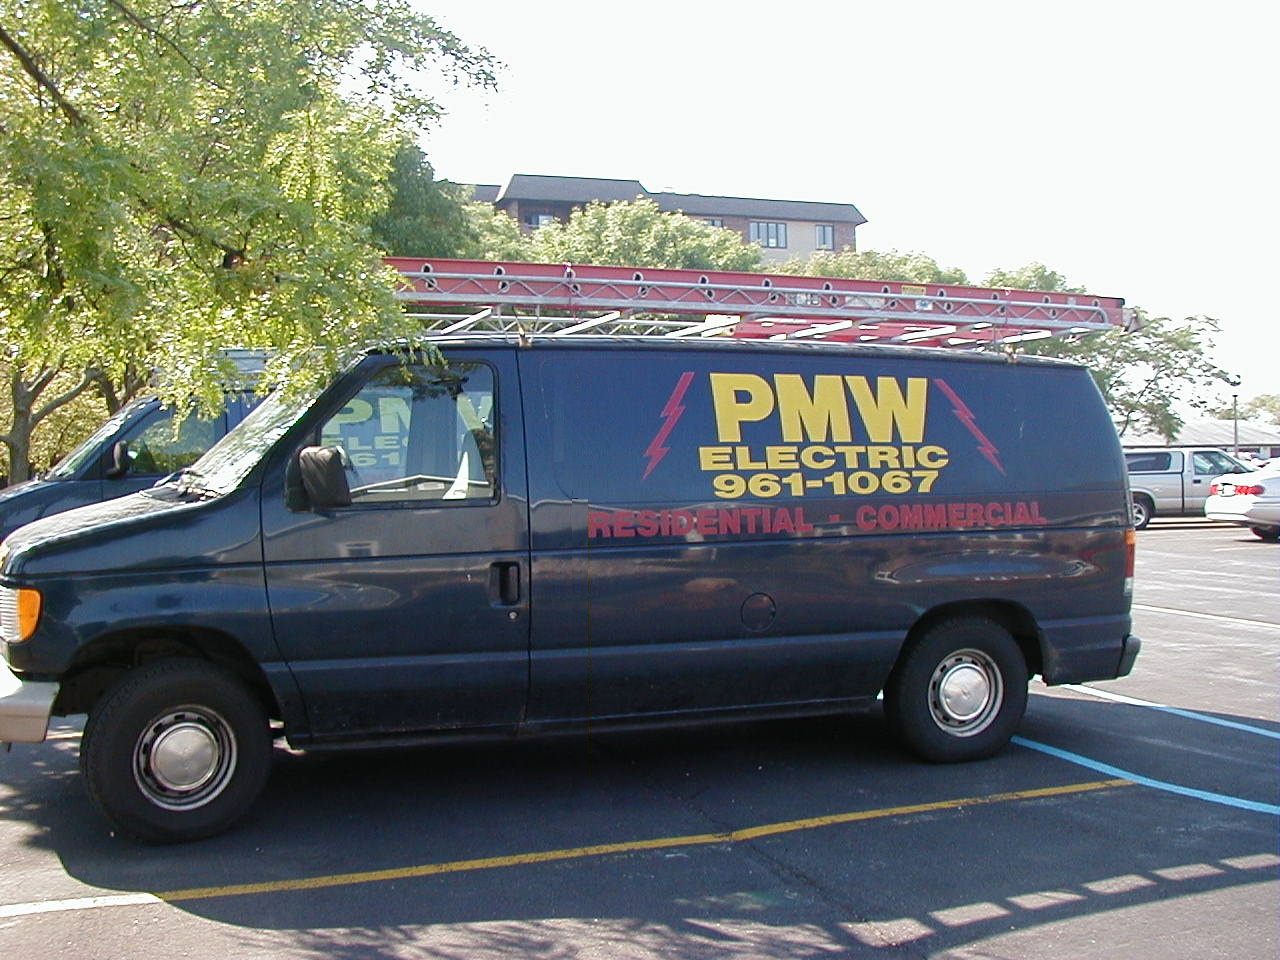 PMW Electric Employee's all use Dark Blue vans with Distinctive lettering